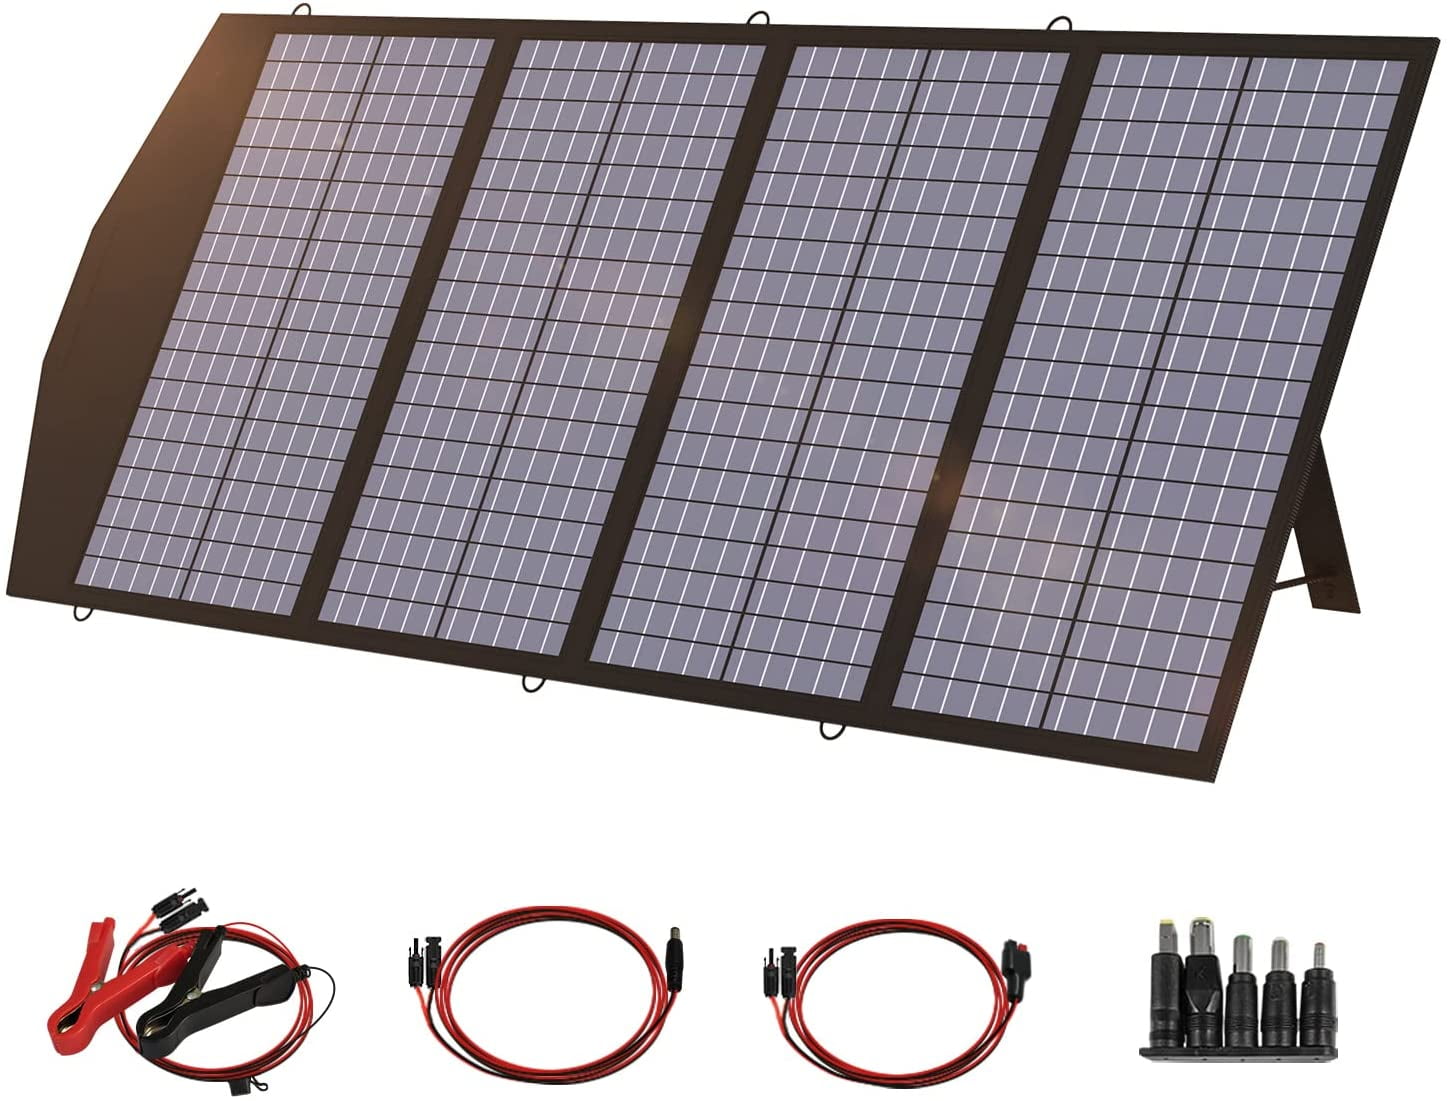 Power Station Power Station ALLPOWERS 120W Portable Solar Panel Charger for Laptops Cellphone DC for Most Solar Generator Foldable US Solar Cell Solar Charger with MC- 4 and USB Output 